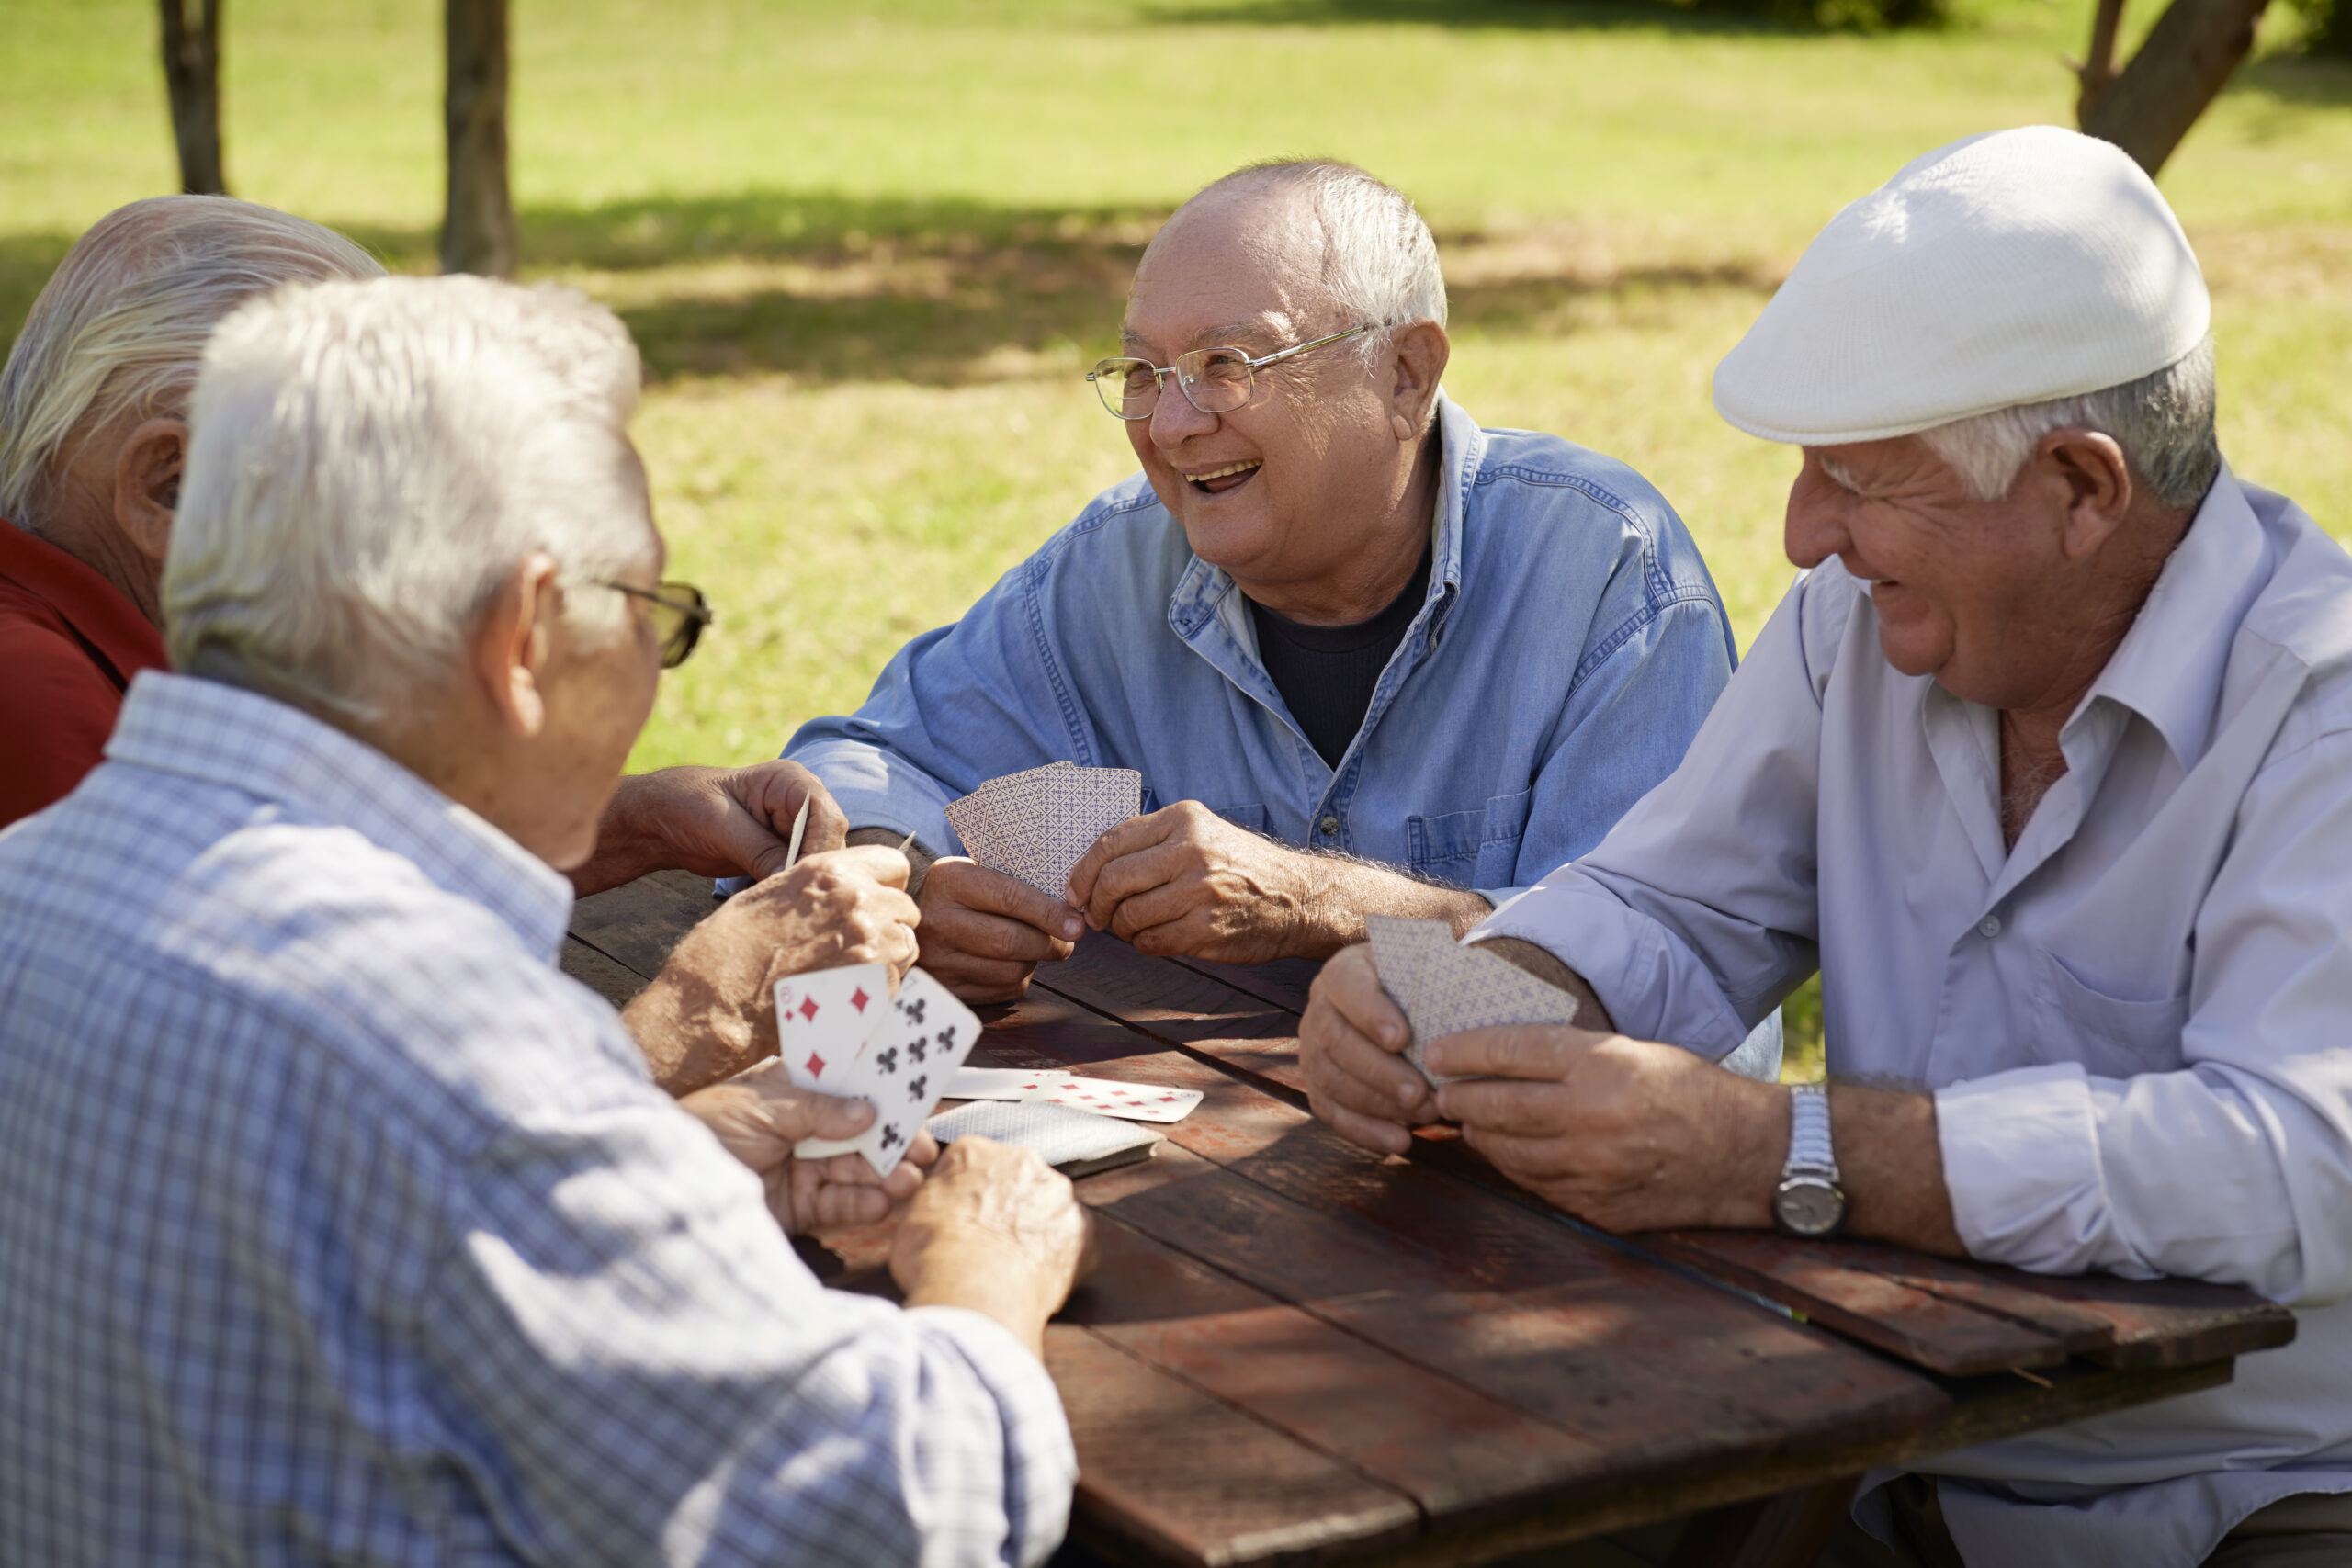 Group of senior men, smiling and playing cards at the park